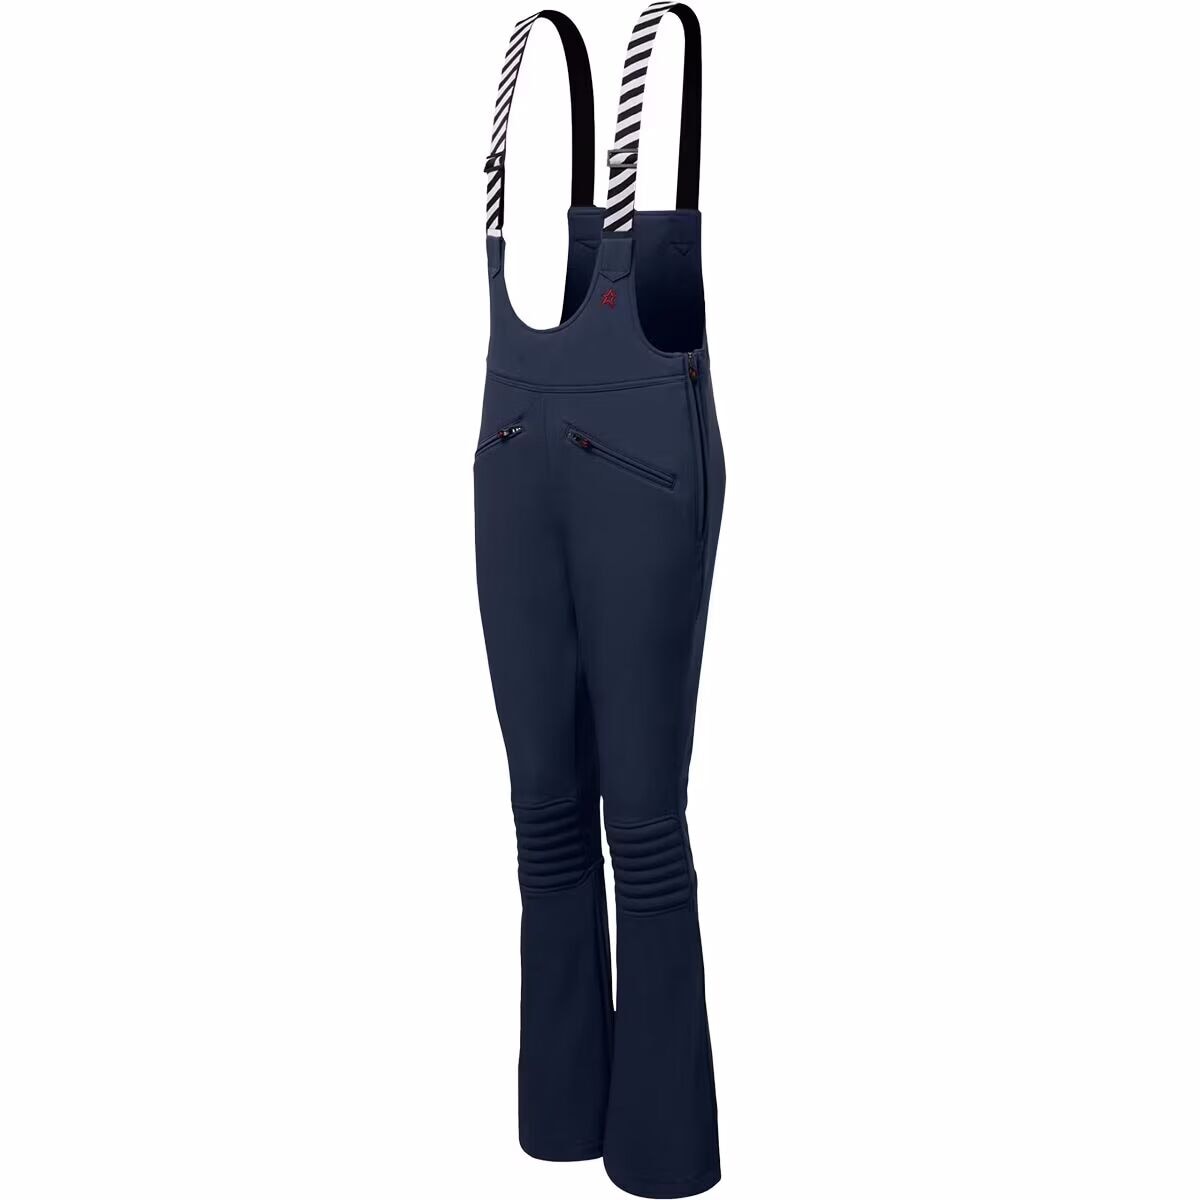 Perfect Moment Isola Racing Pant - Girls'